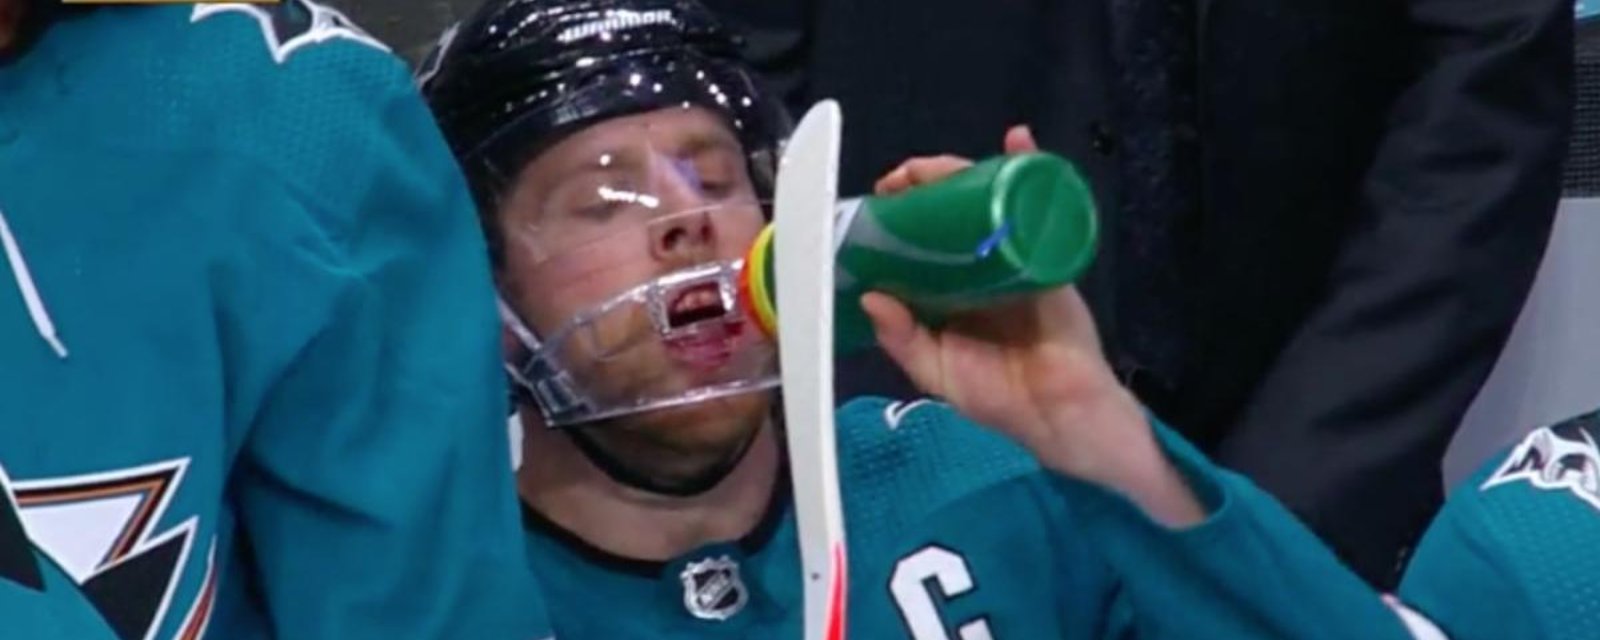 Pavelski’s teammates look for his teeth in the shovelled up snow during TV break